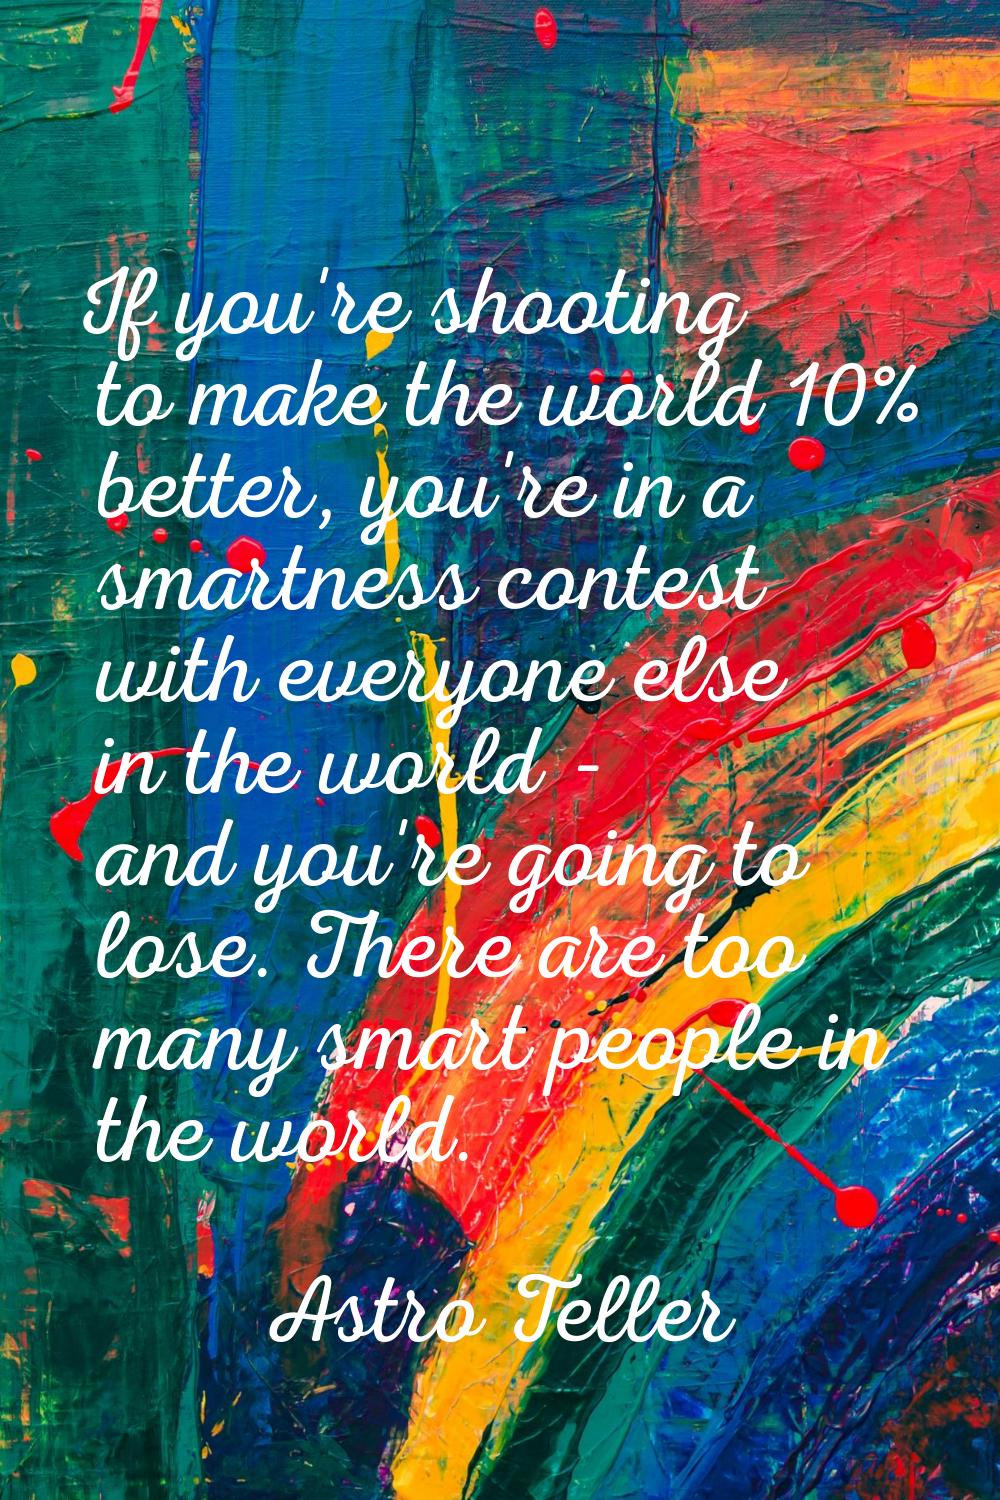 If you're shooting to make the world 10% better, you're in a smartness contest with everyone else i